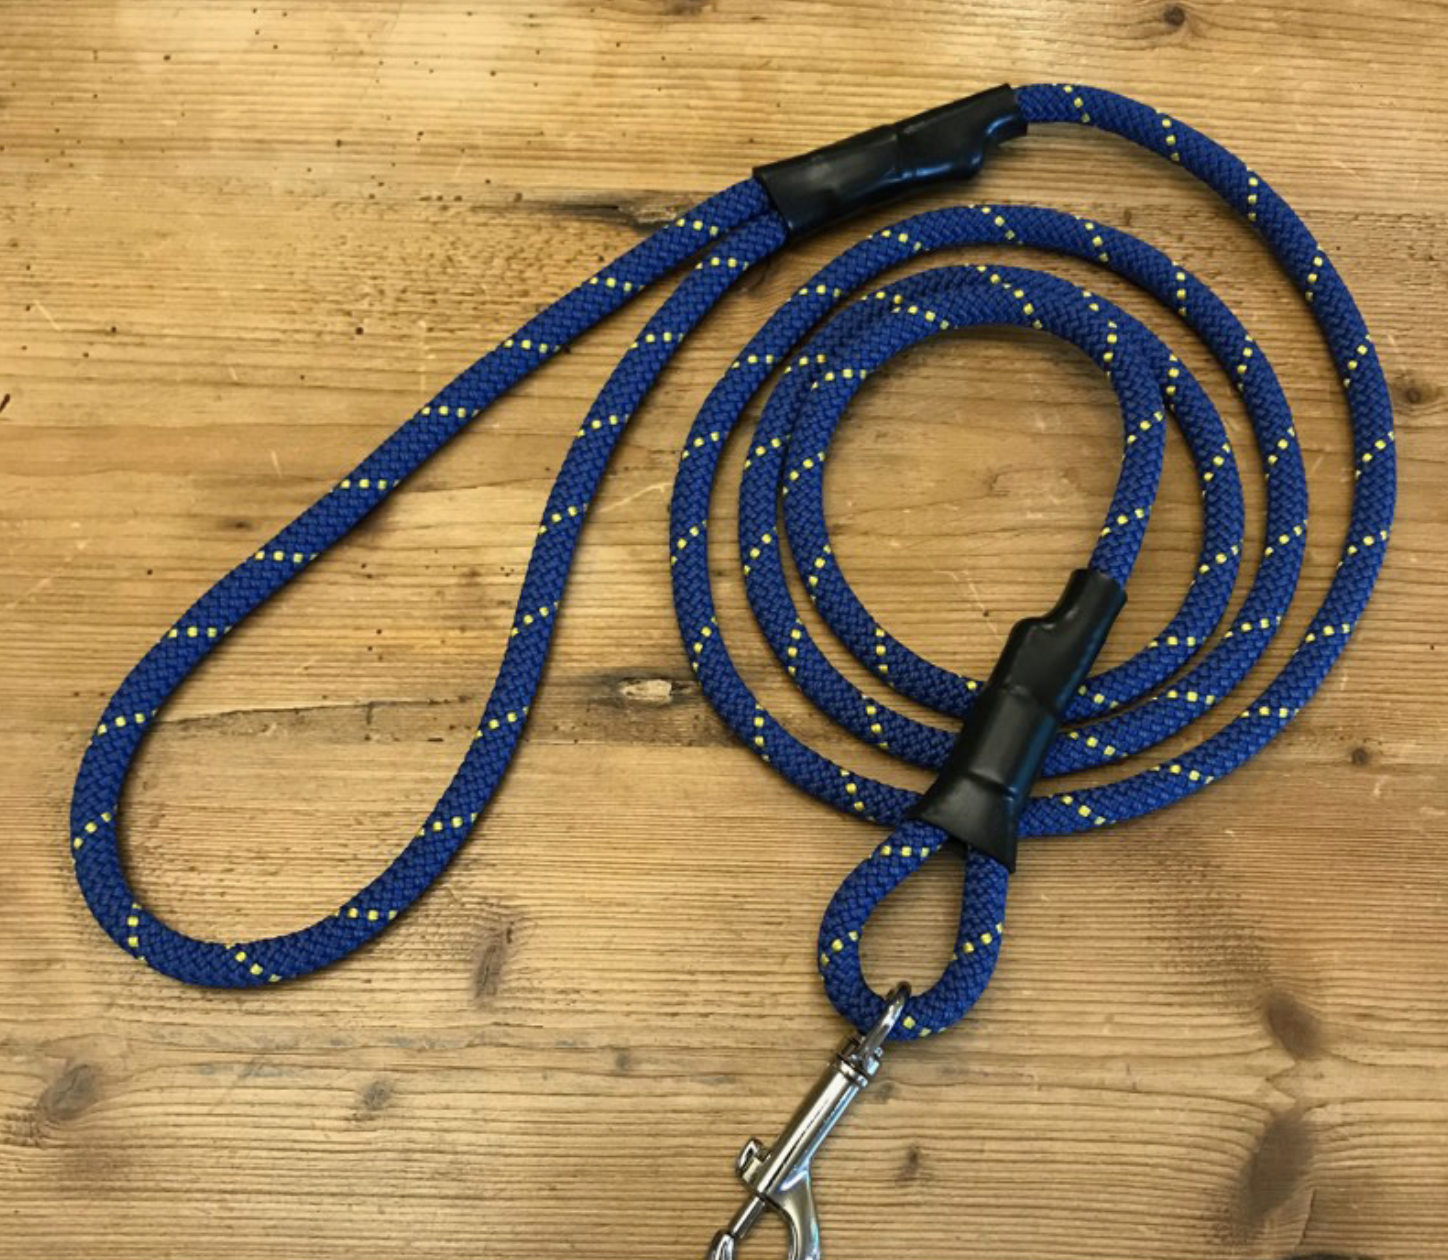 How to Make a DIY Dog Leash with Heat Shrink Tubing